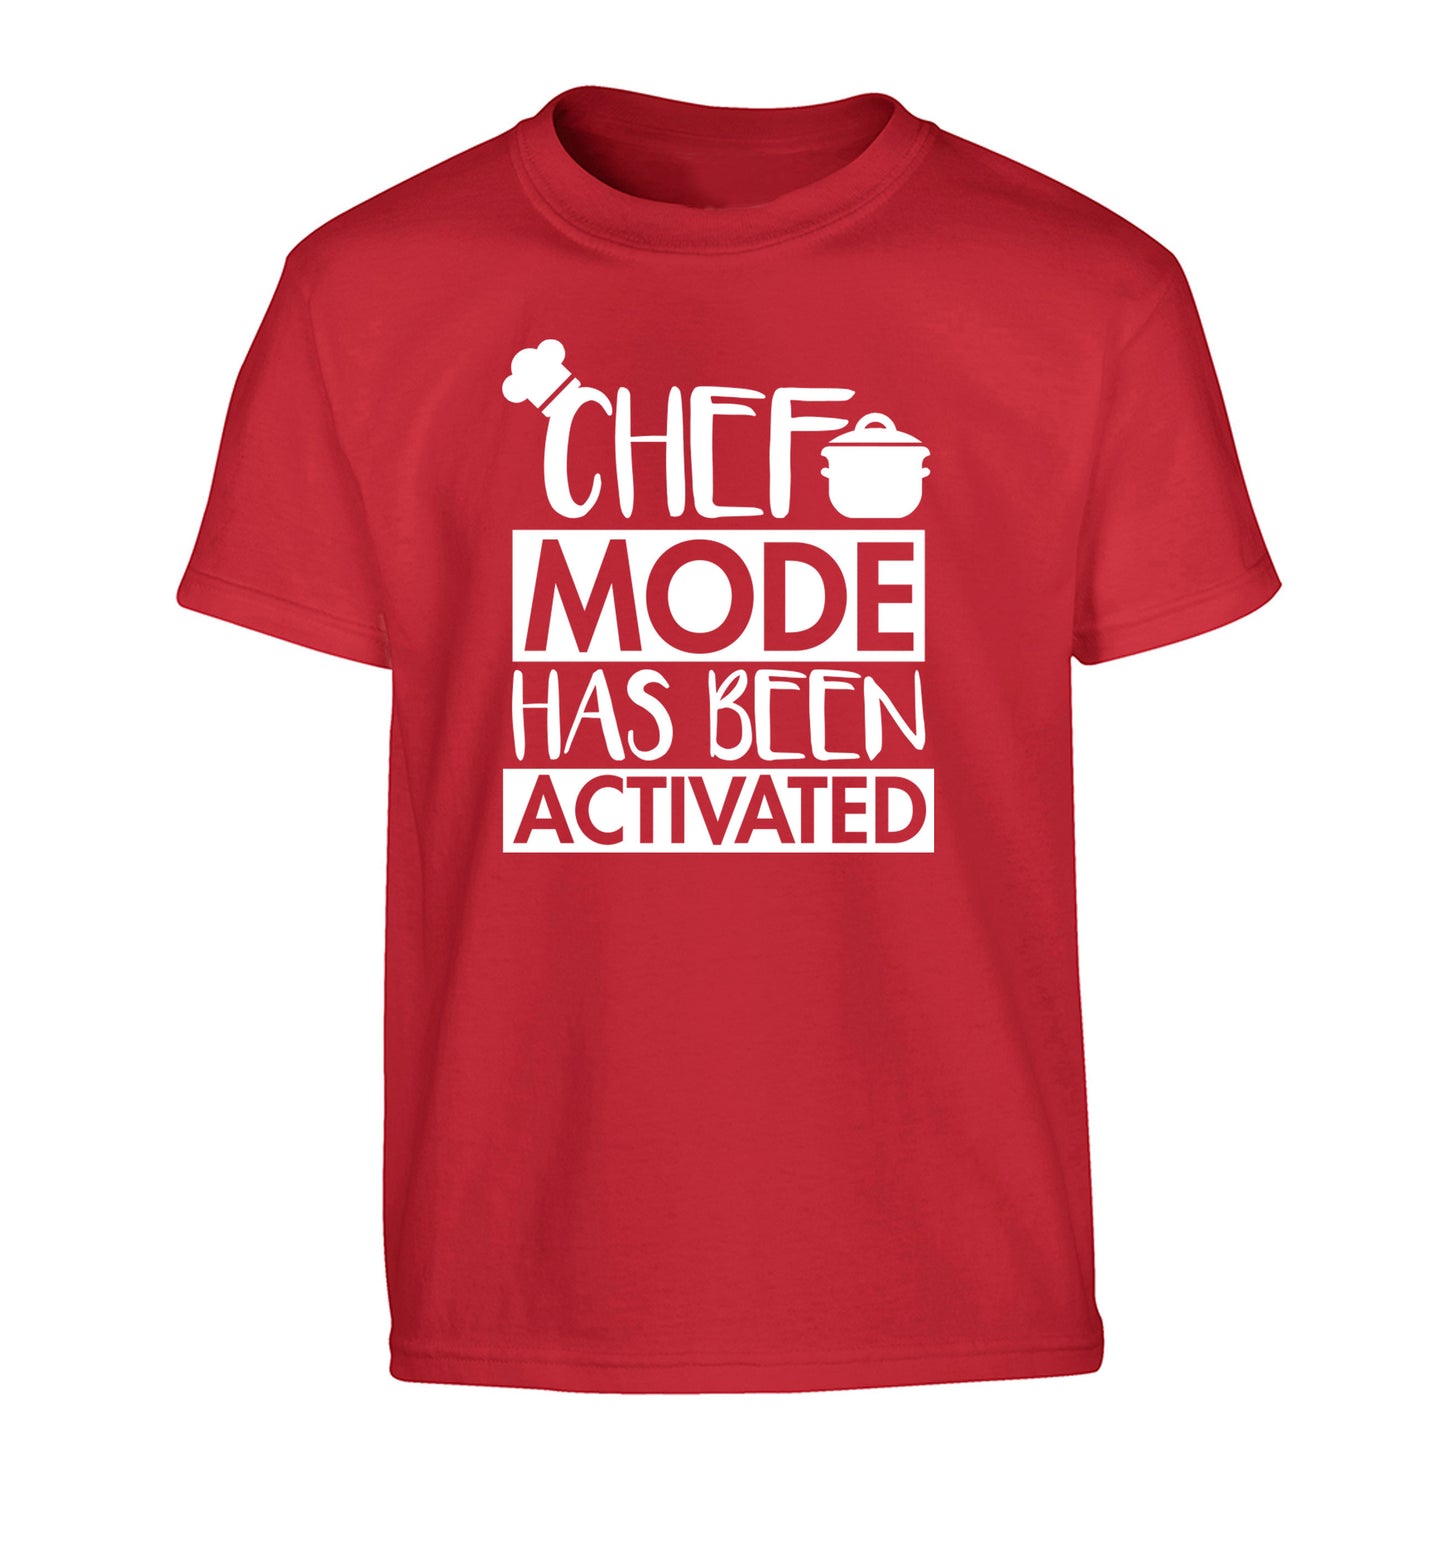 Chef mode has been activated Children's red Tshirt 12-14 Years